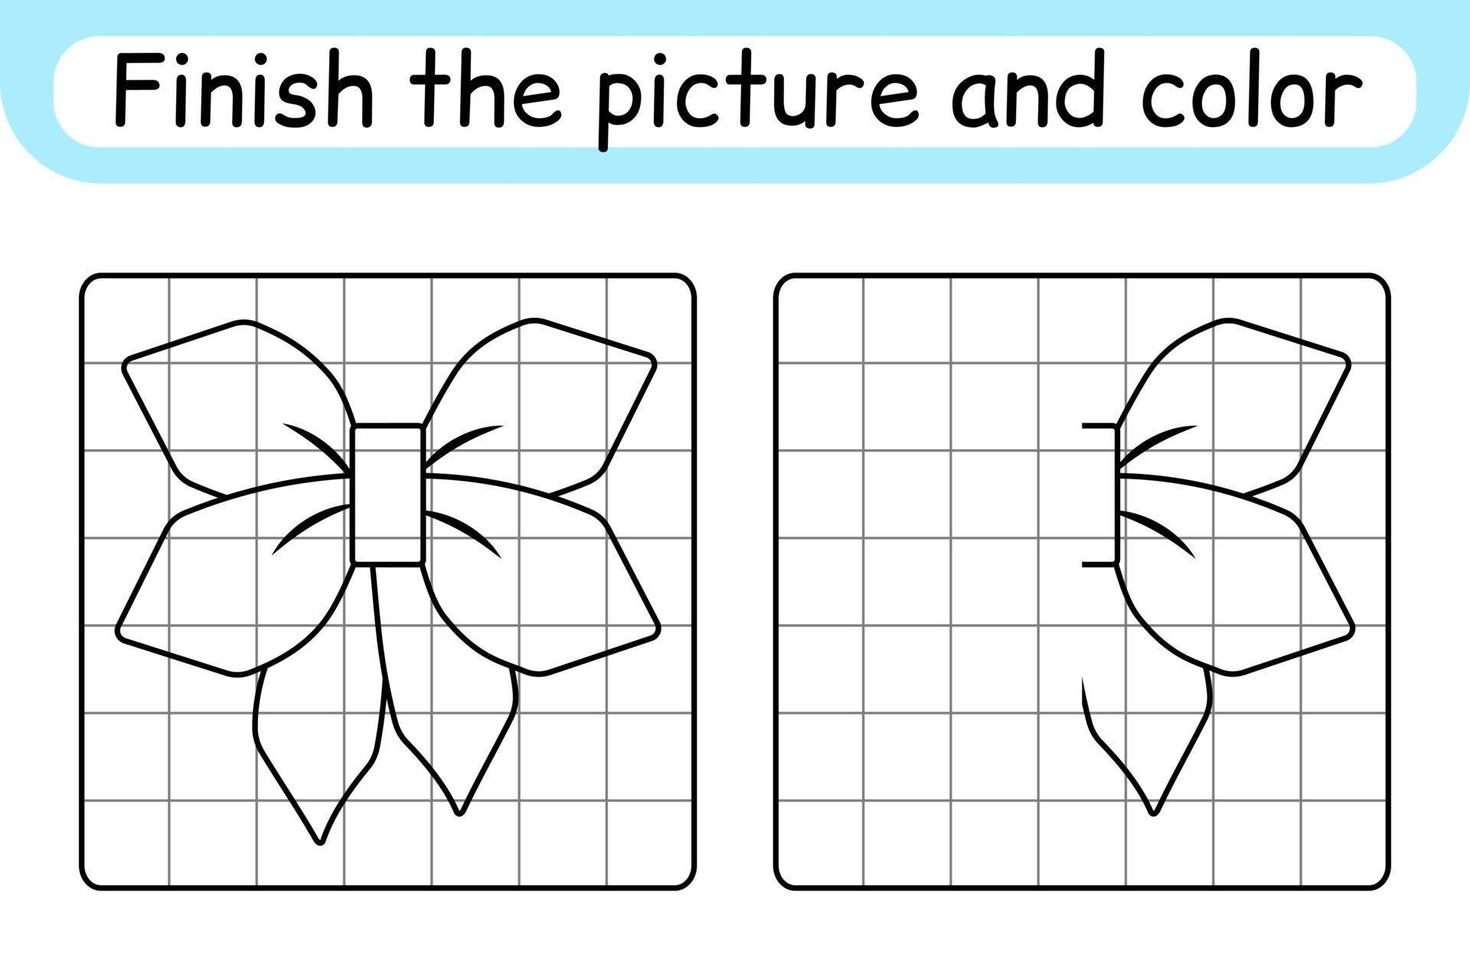 Complete the picture bow. Copy the picture and color. Finish the image. Coloring book. Educational drawing exercise game for children vector